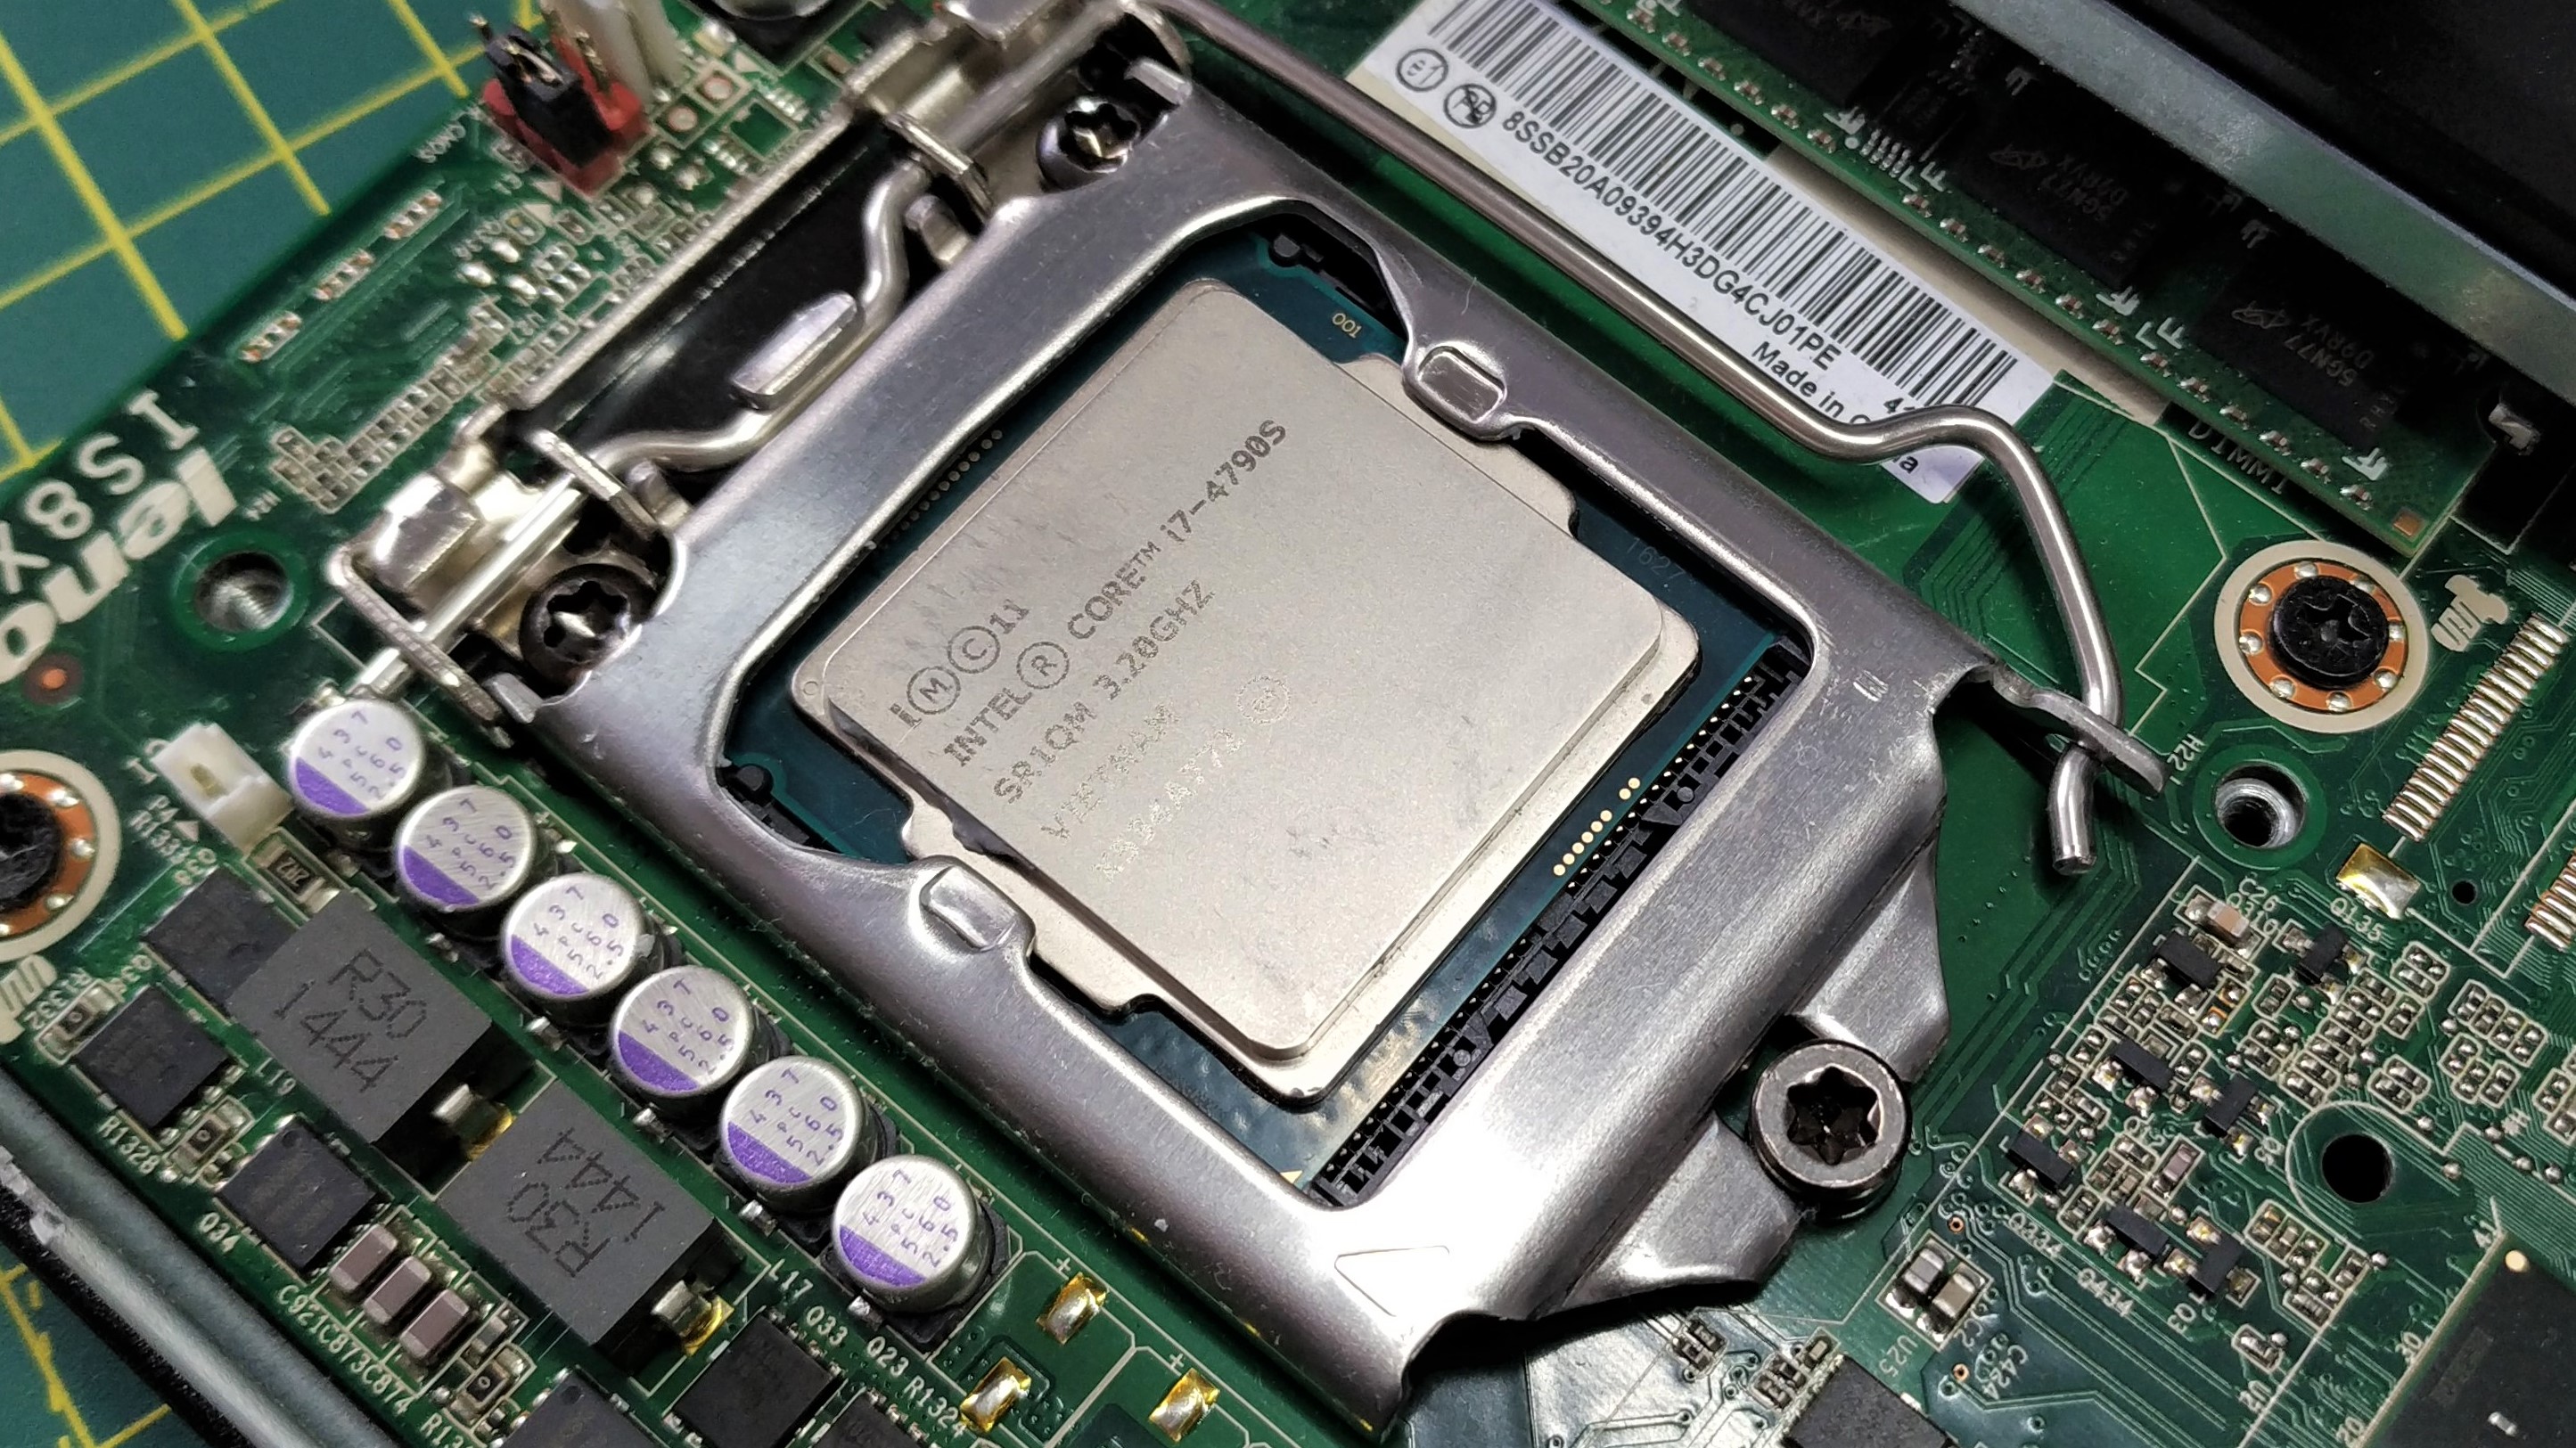 Removal of thermal paste